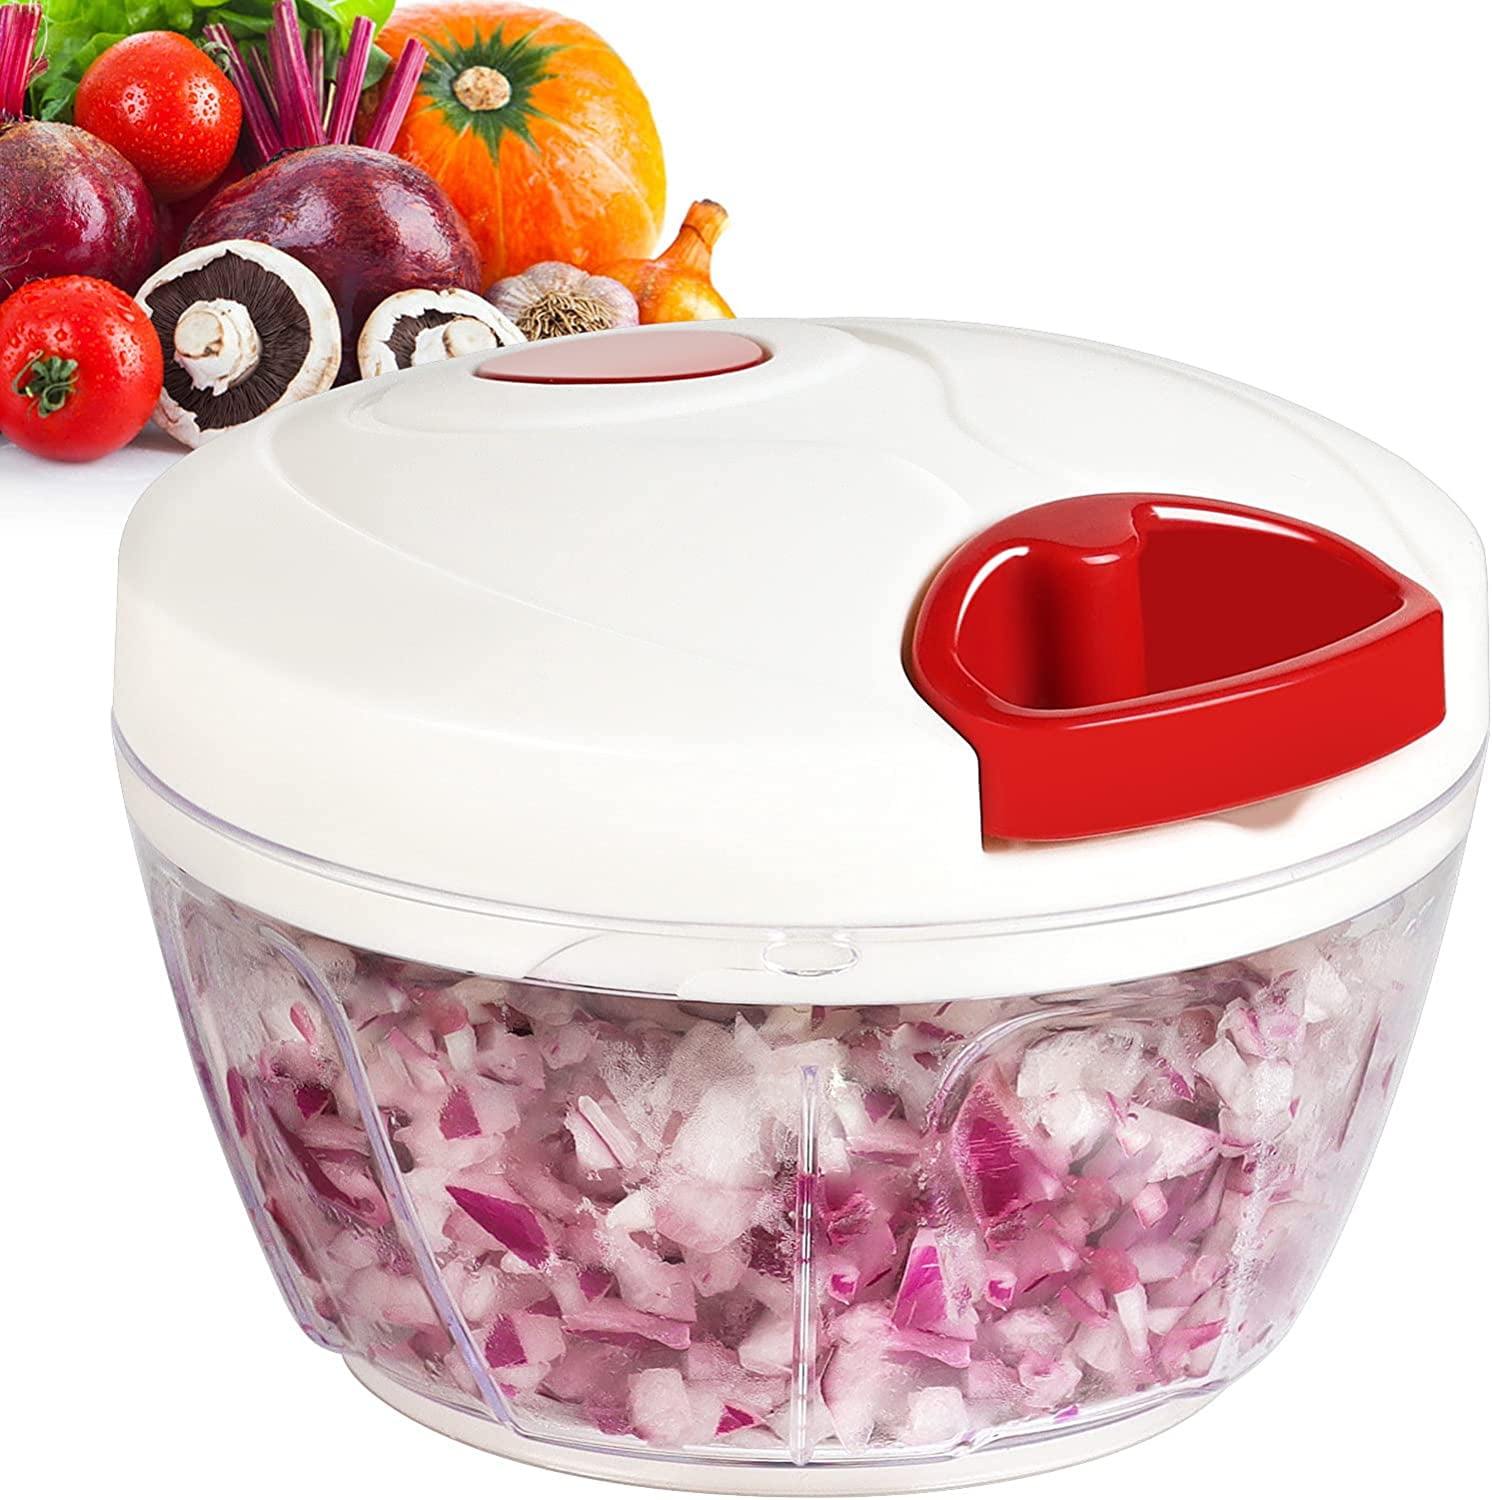 Manual Food Chopper Hand Pull String Vegetable Chopper With Container  Garlic Onions Papers Fruits Nuts etc. Durable BPA Free Food Safe Material –  900